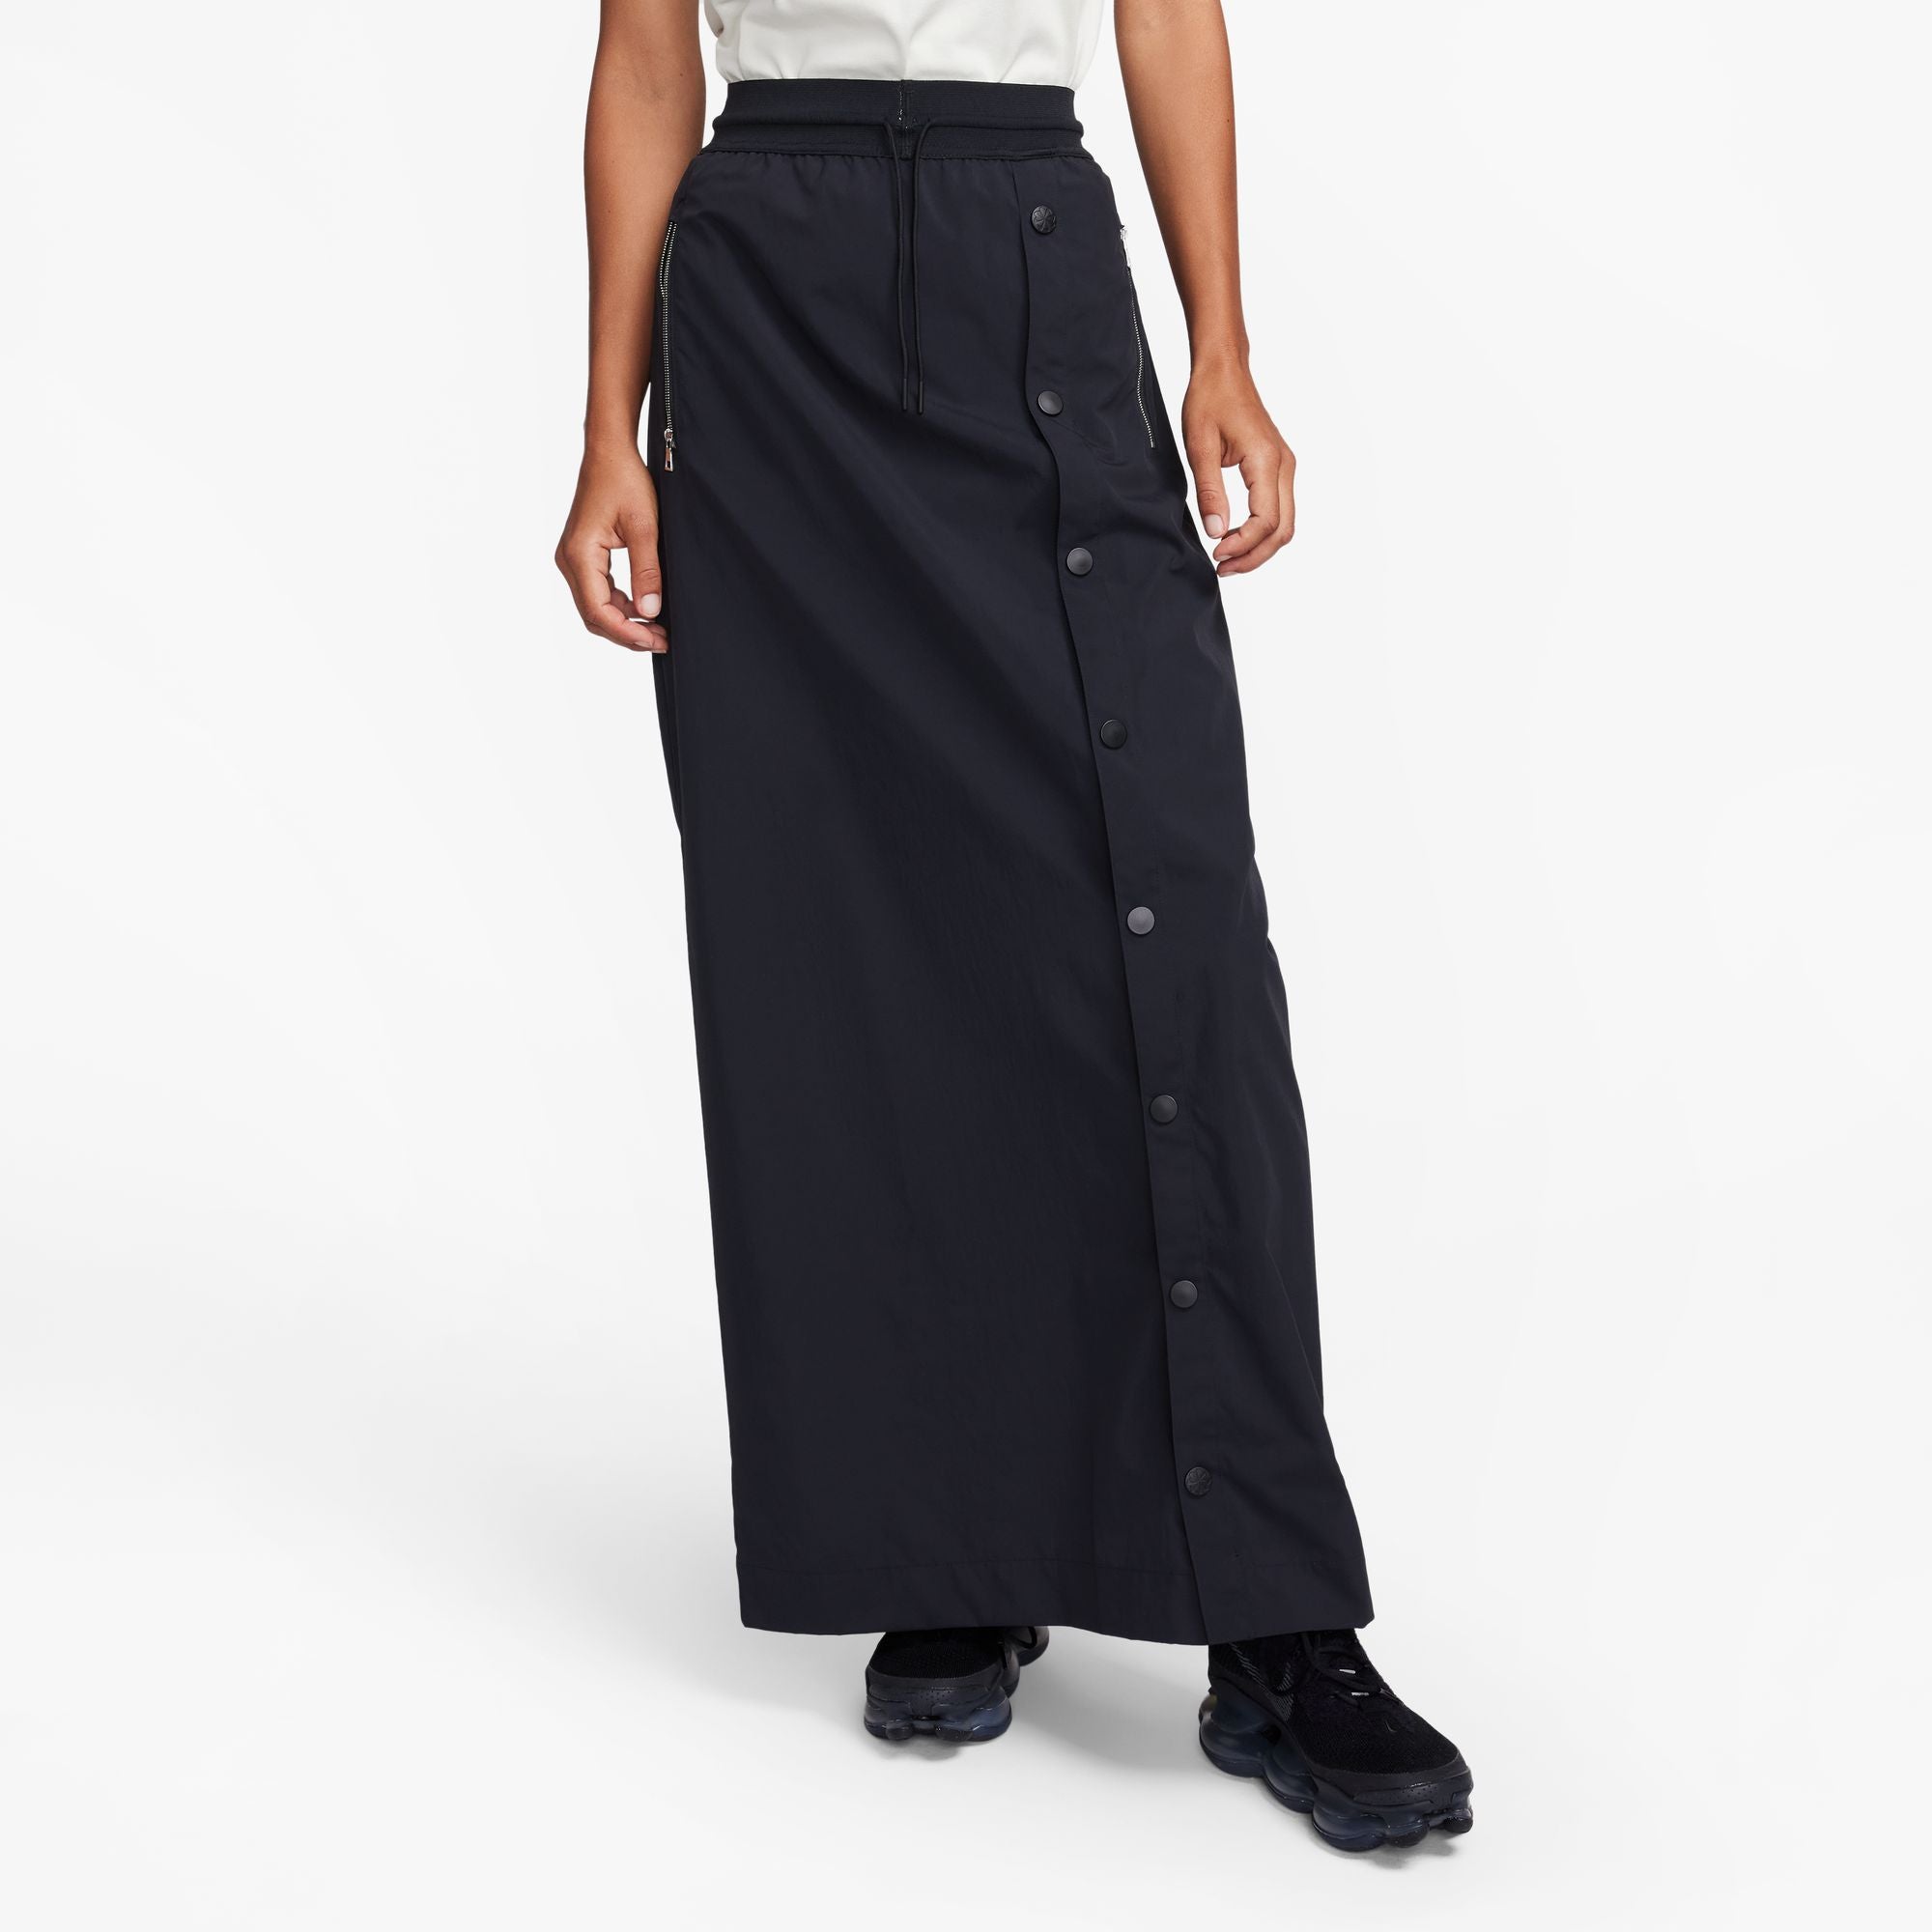 NSW TECH PACK REPEL HIGH-WAISTED MAXI SKIRT - BLACK/ANTHRACITE/ANTHRACITE